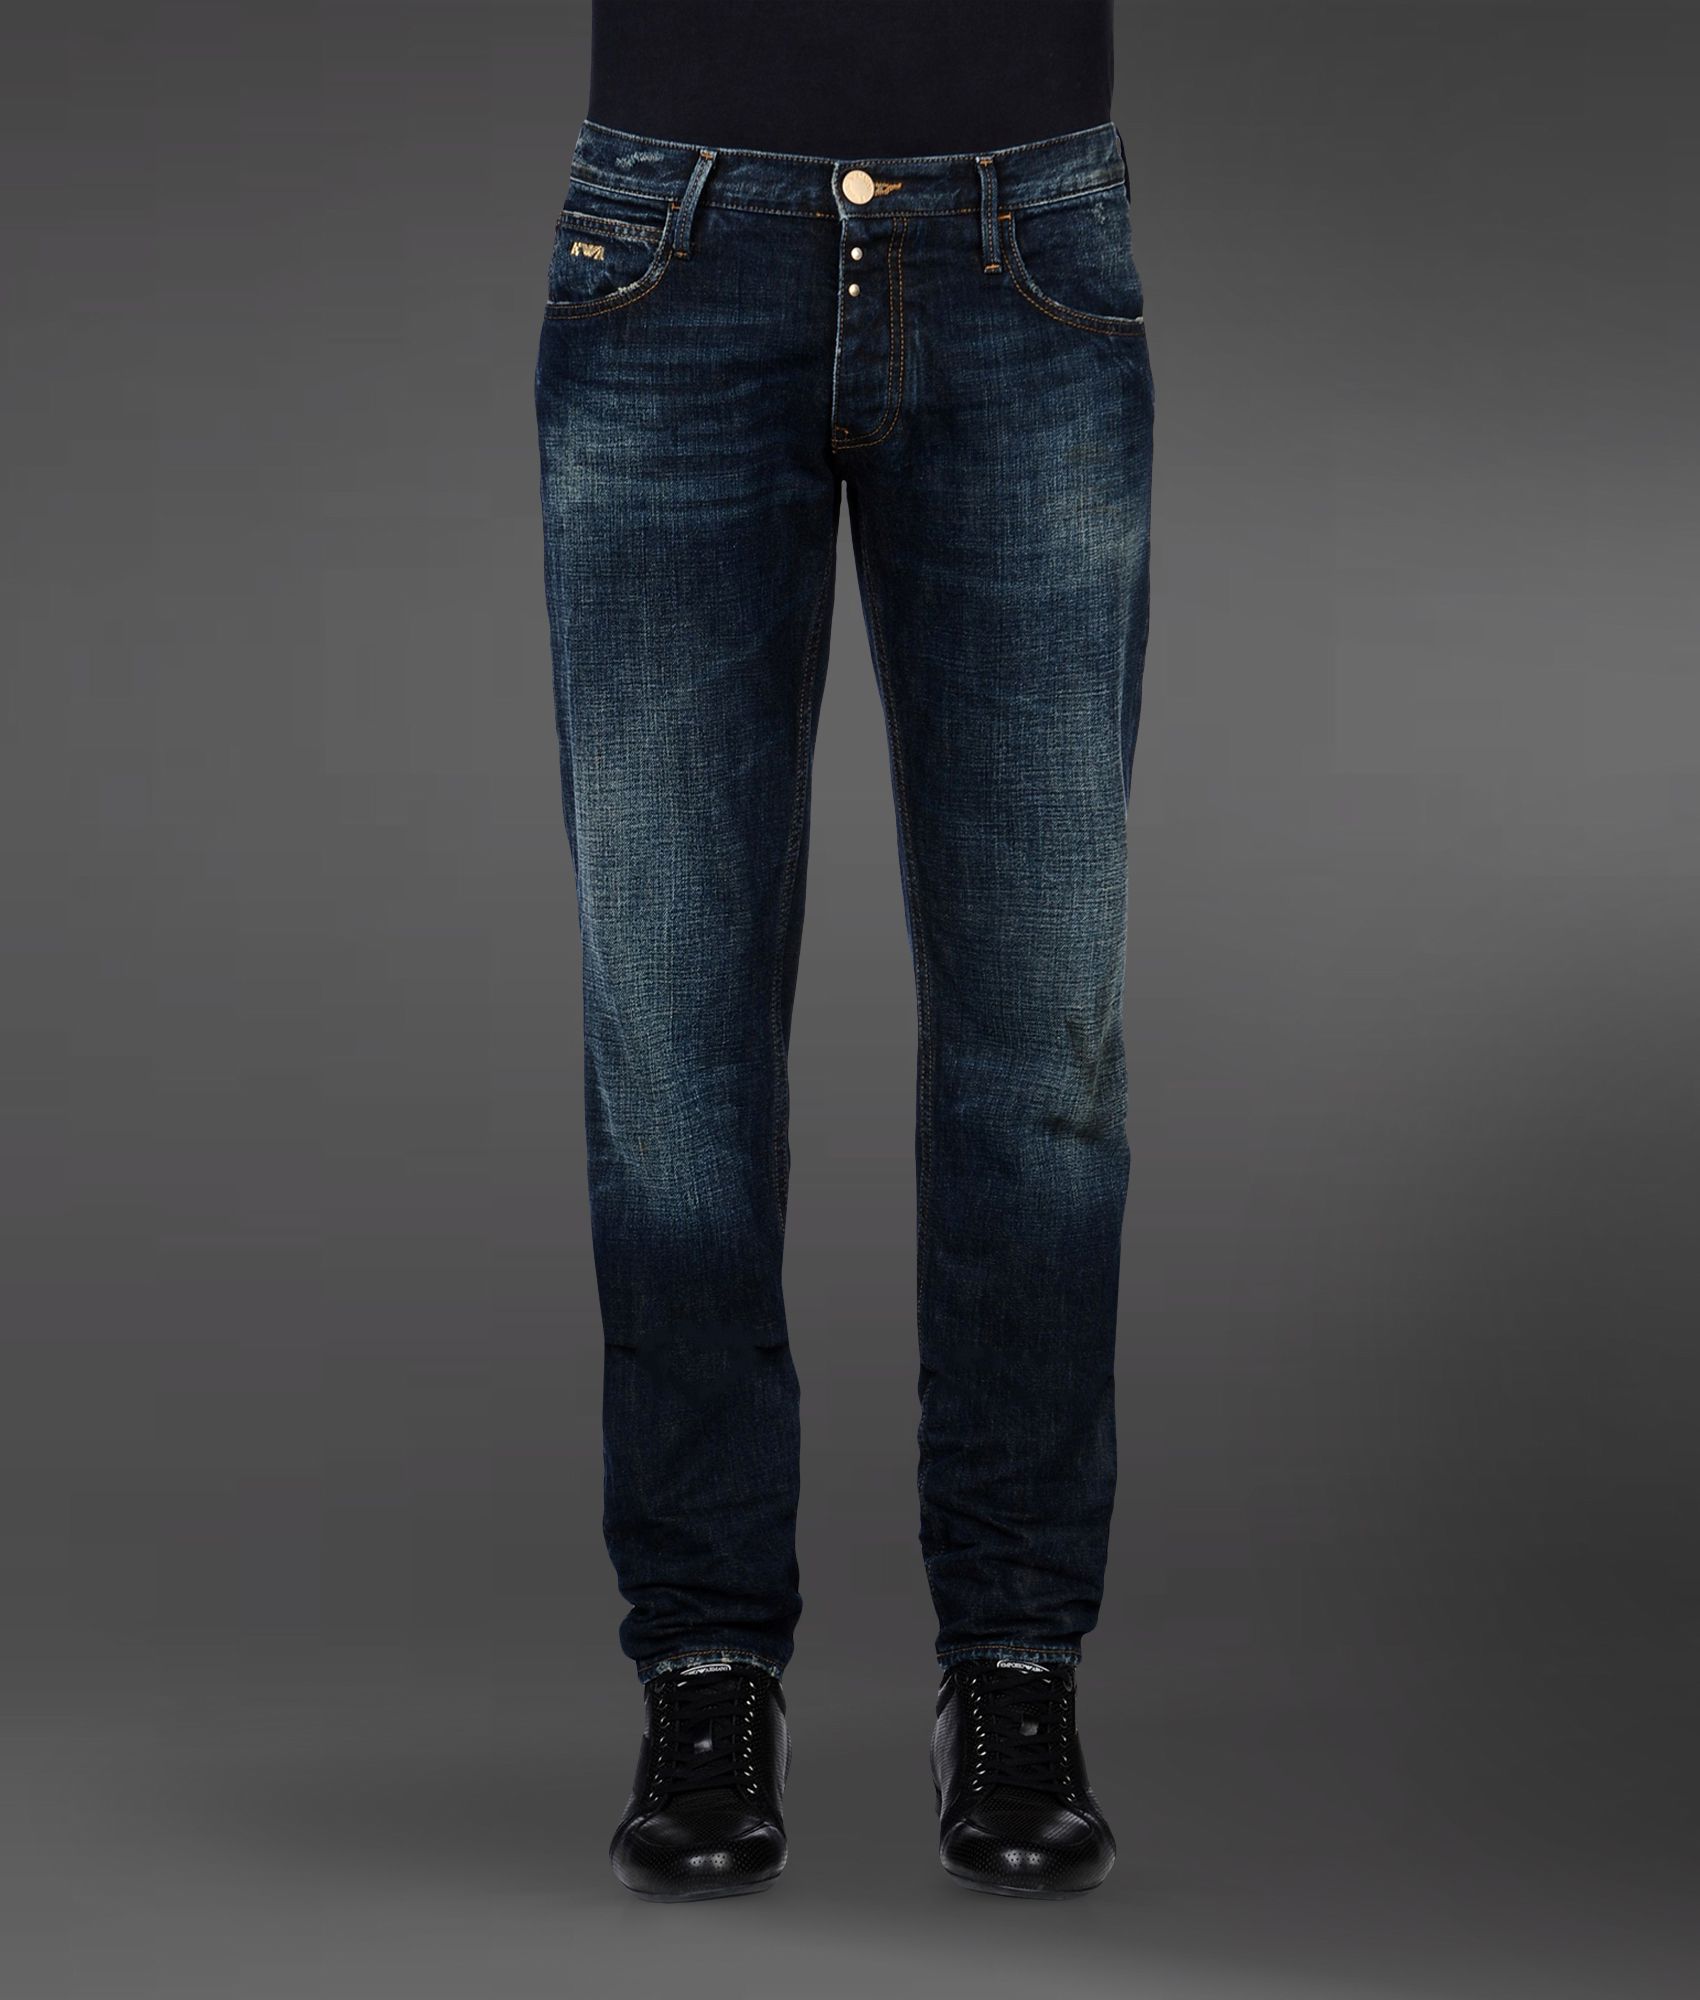 Lyst - Emporio armani Washed Skinny Jeans in Blue for Men